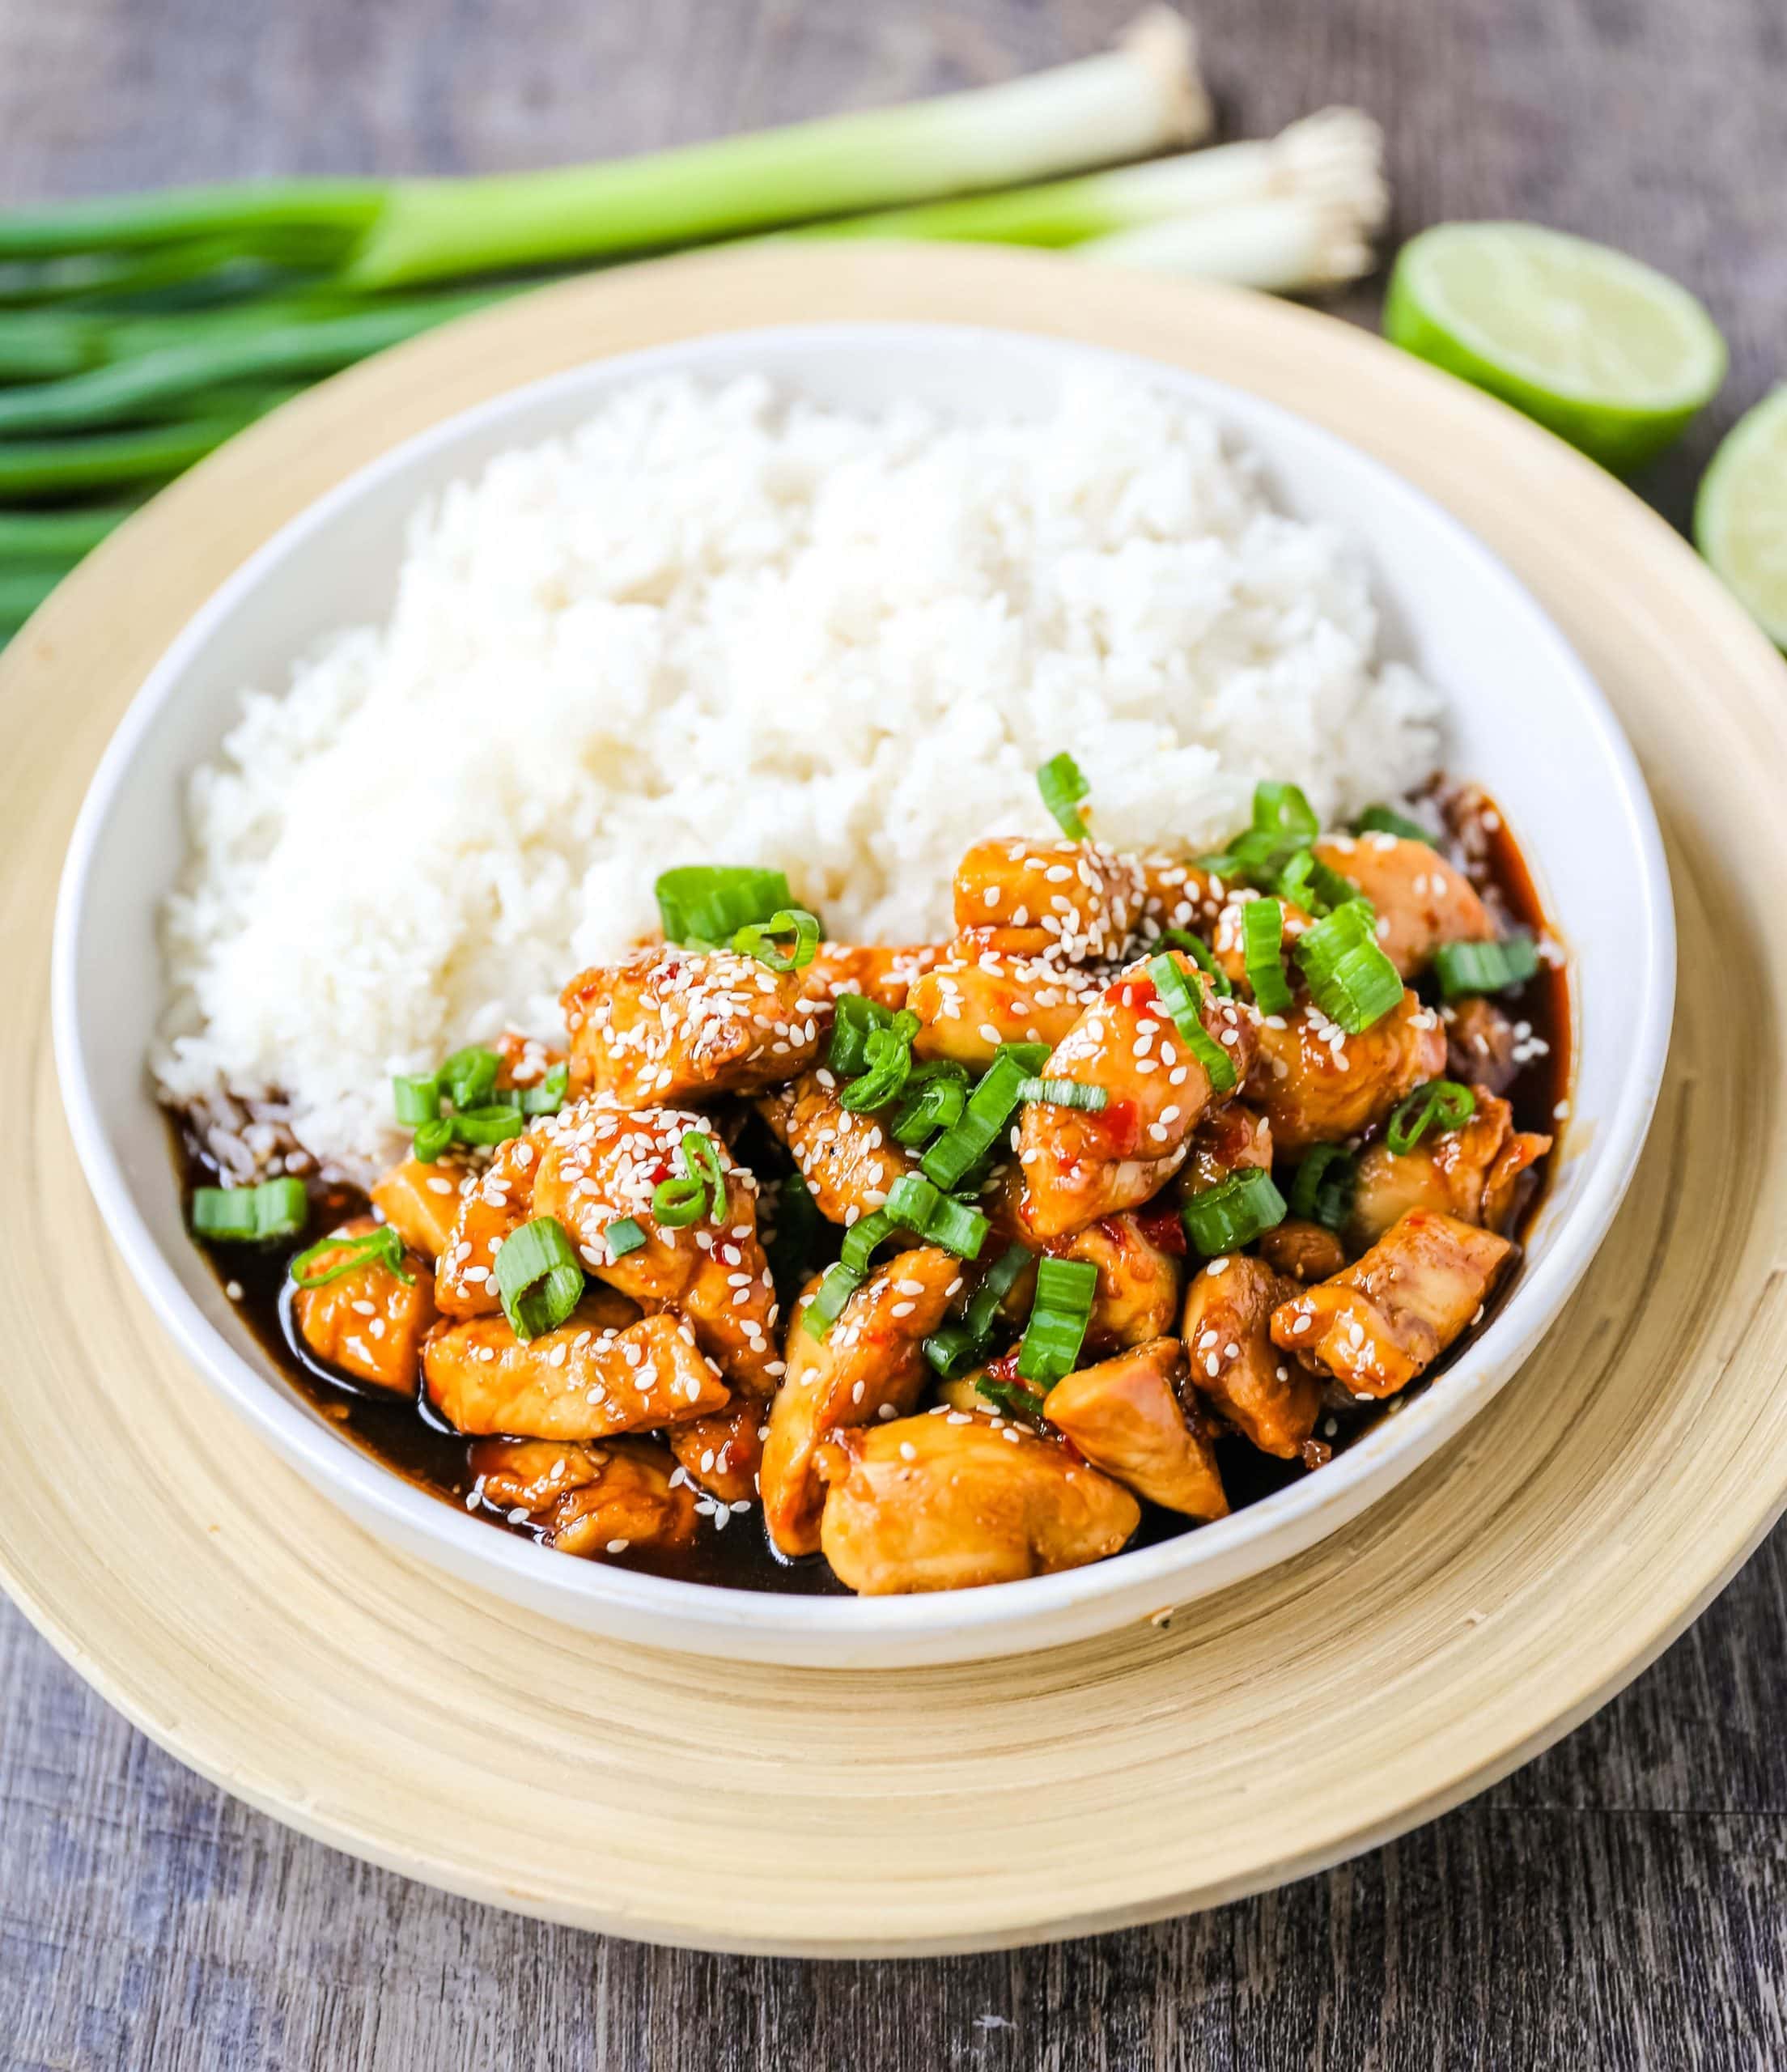 Asian Sticky Chicken Tender chicken sauteed in a sticky sweet and tangy Asian sauce served with creamy coconut rice. A quick and easy 20-minute dinner! www.modernhoney.com #asianfood #chinesefood #stickychicken #chicken 